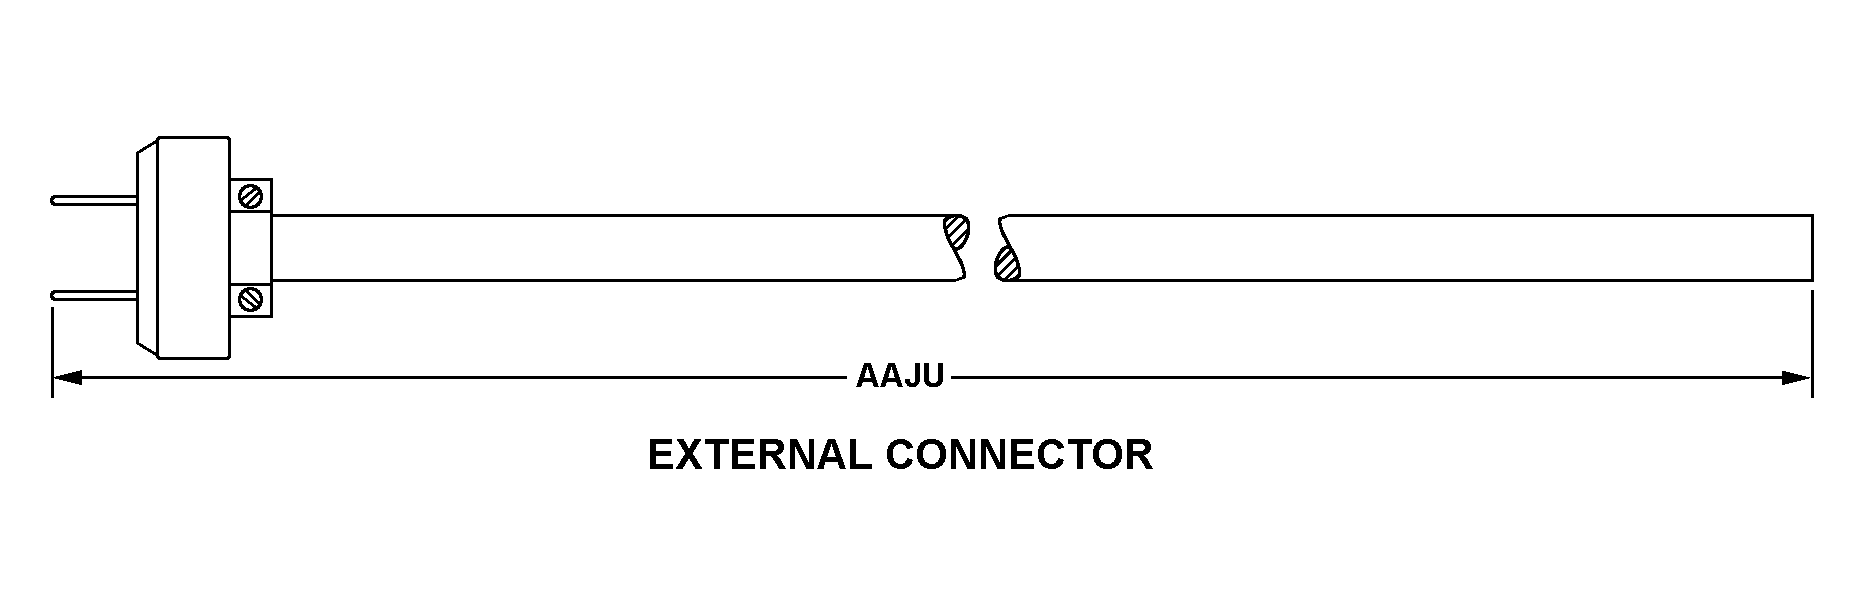 EXTERNAL CONNECTOR style nsn 5995-01-353-6201